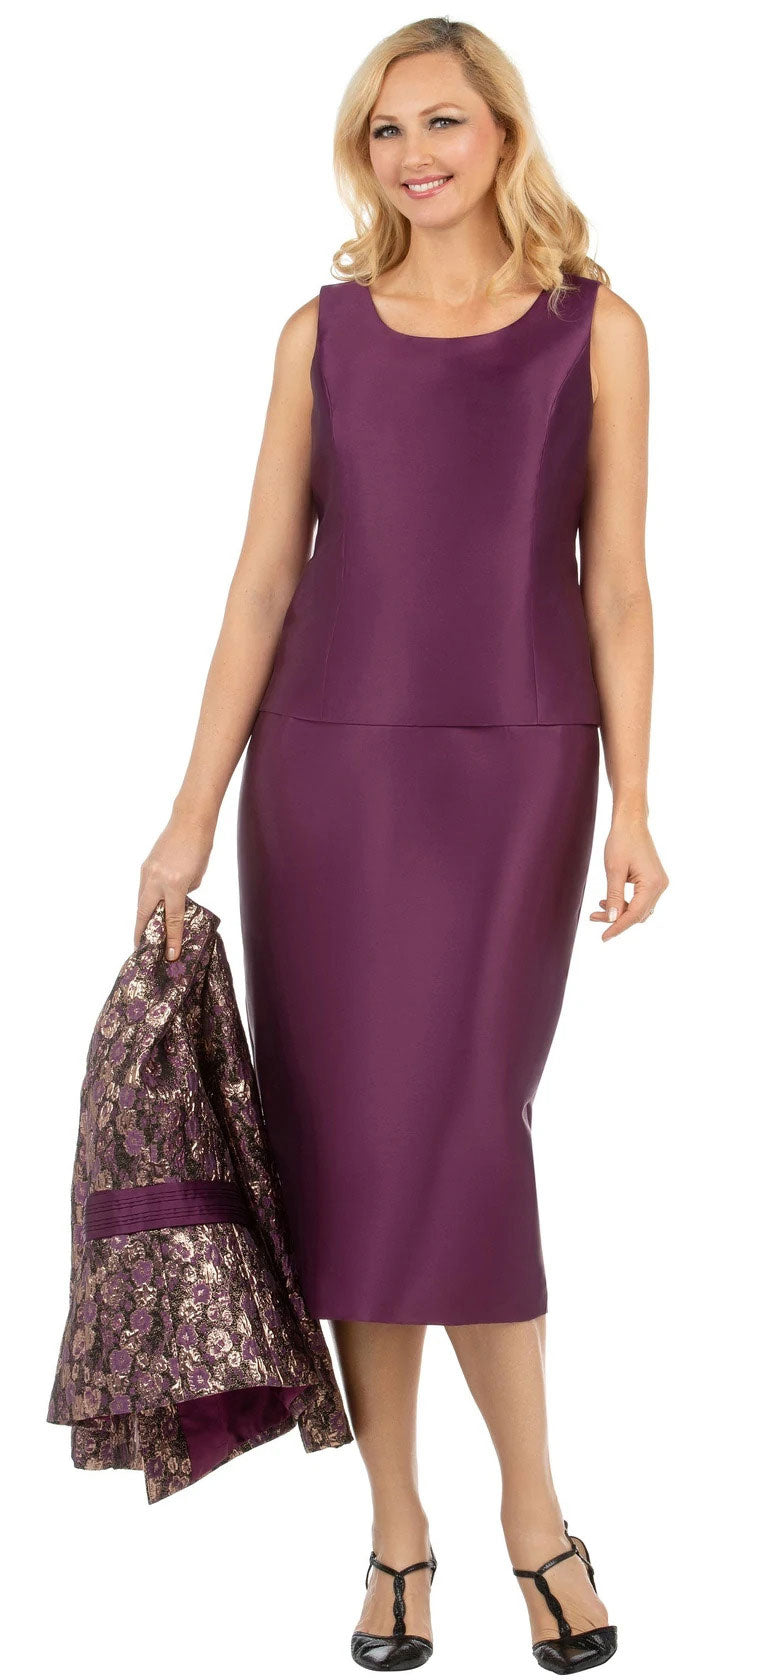 Giovanna Suit G1132-Plum - Church Suits For Less